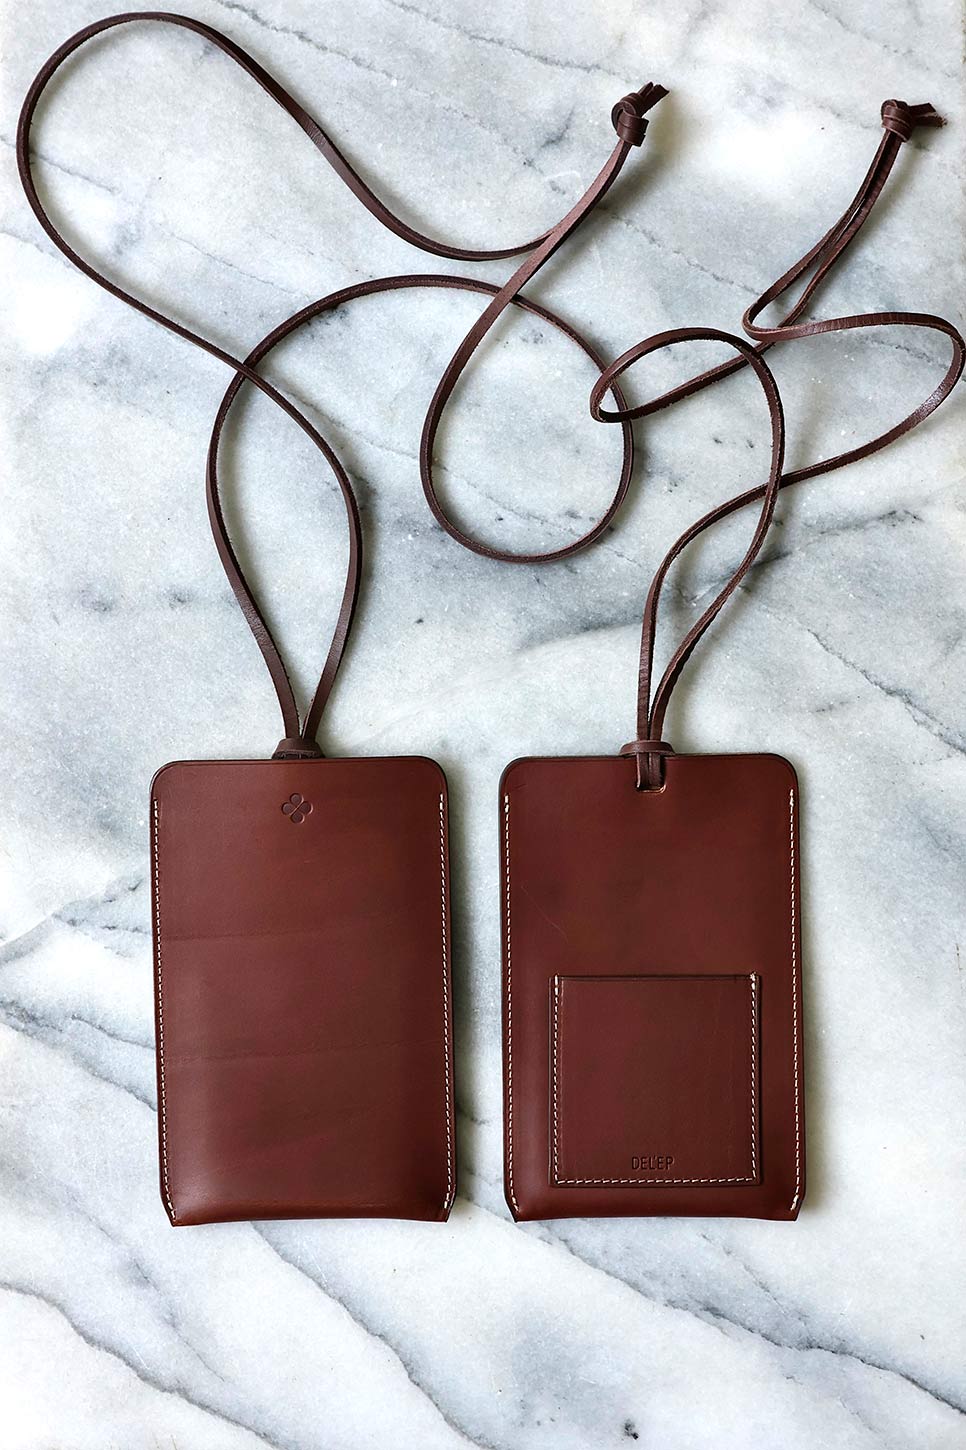 luxurious handcrafted brown leather phone pouch